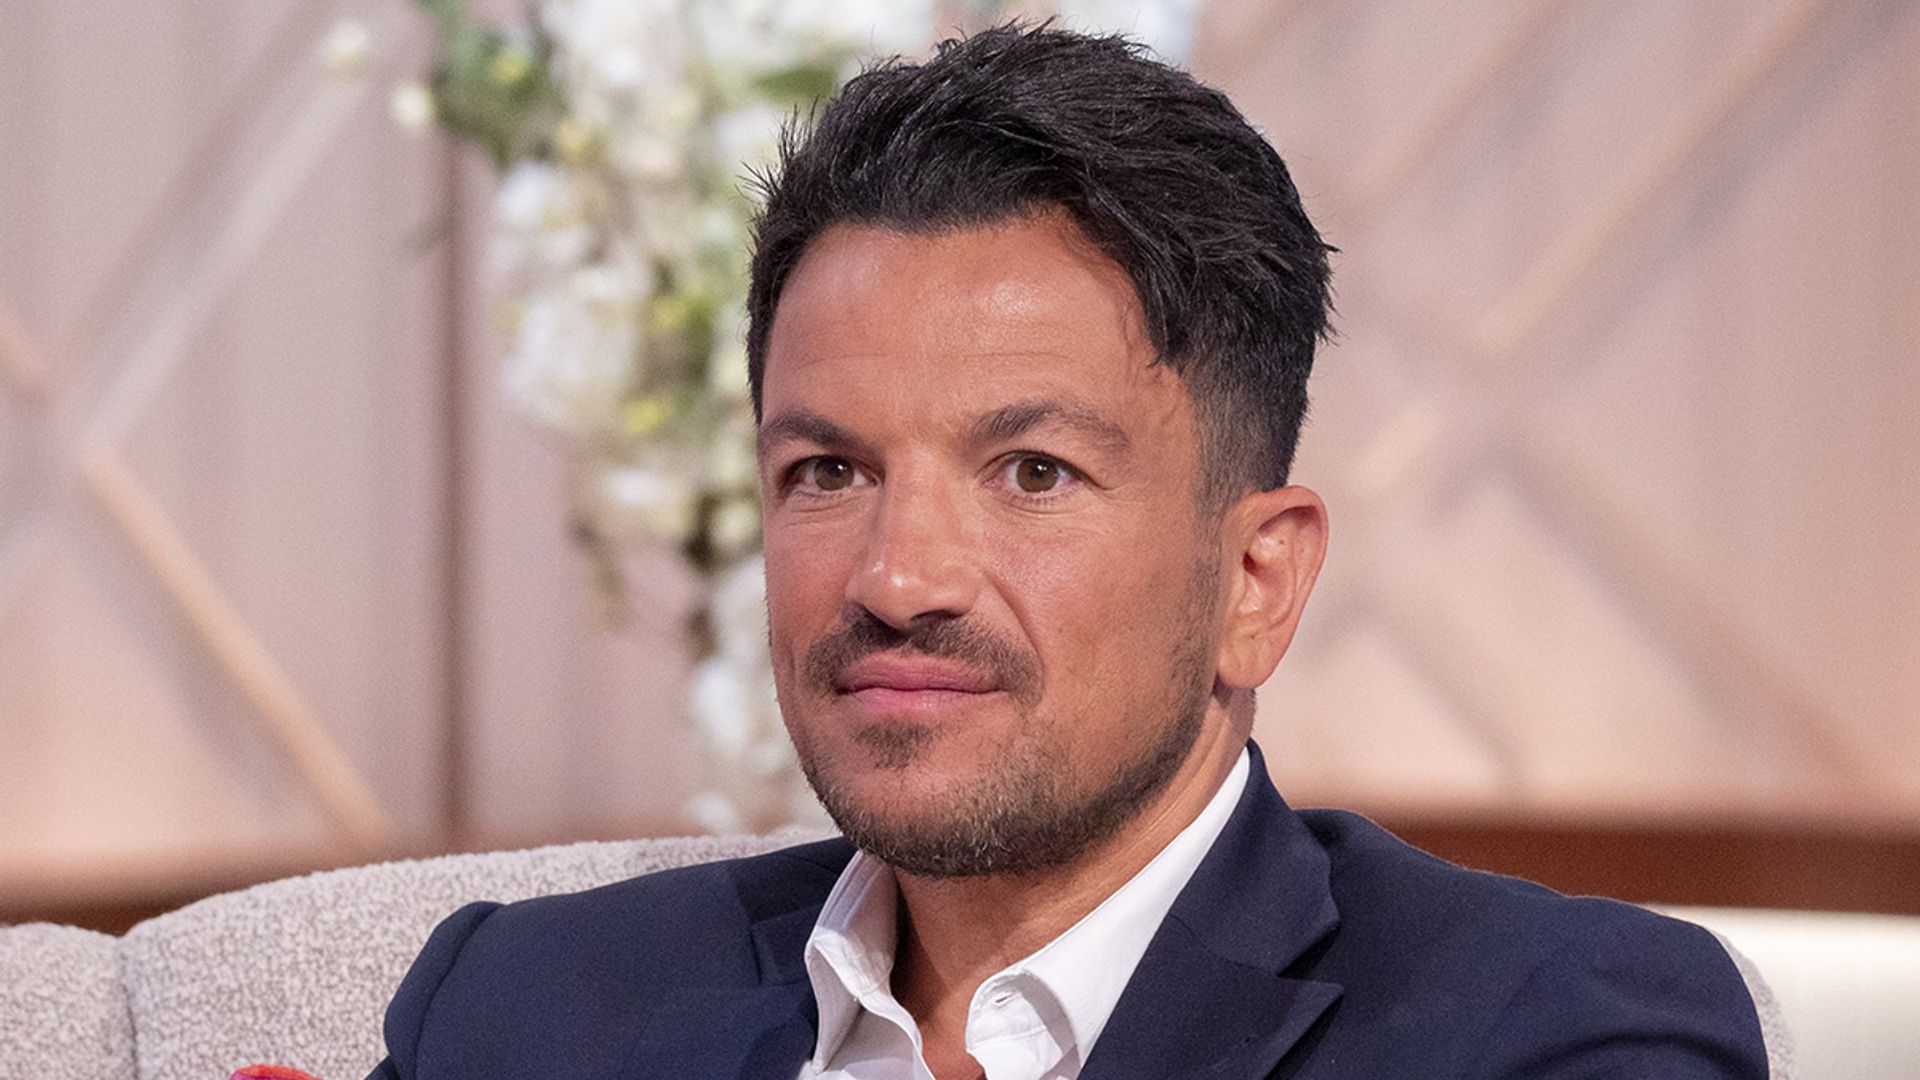 peter andre house surrey